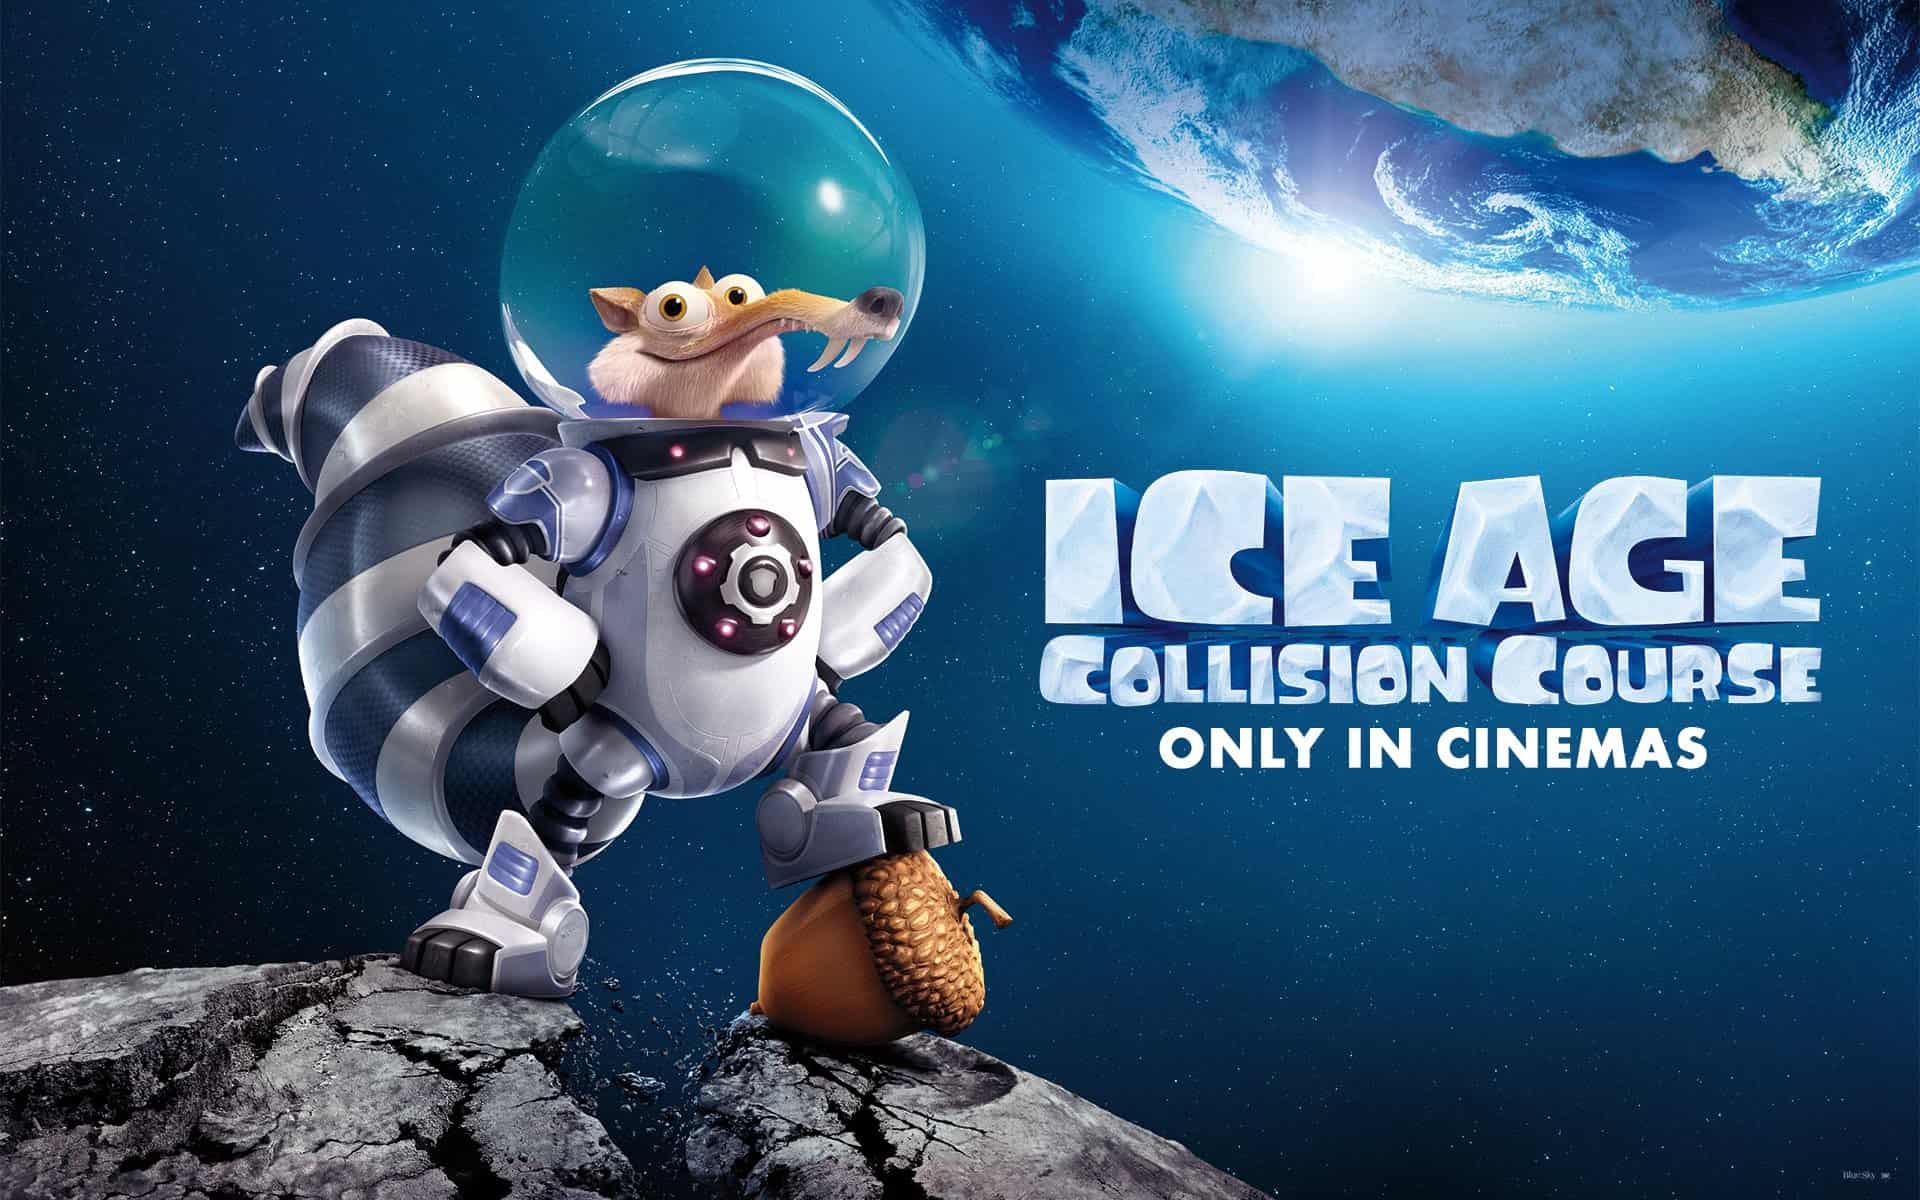 Ice Age Collision Course 4K 2016 big poster